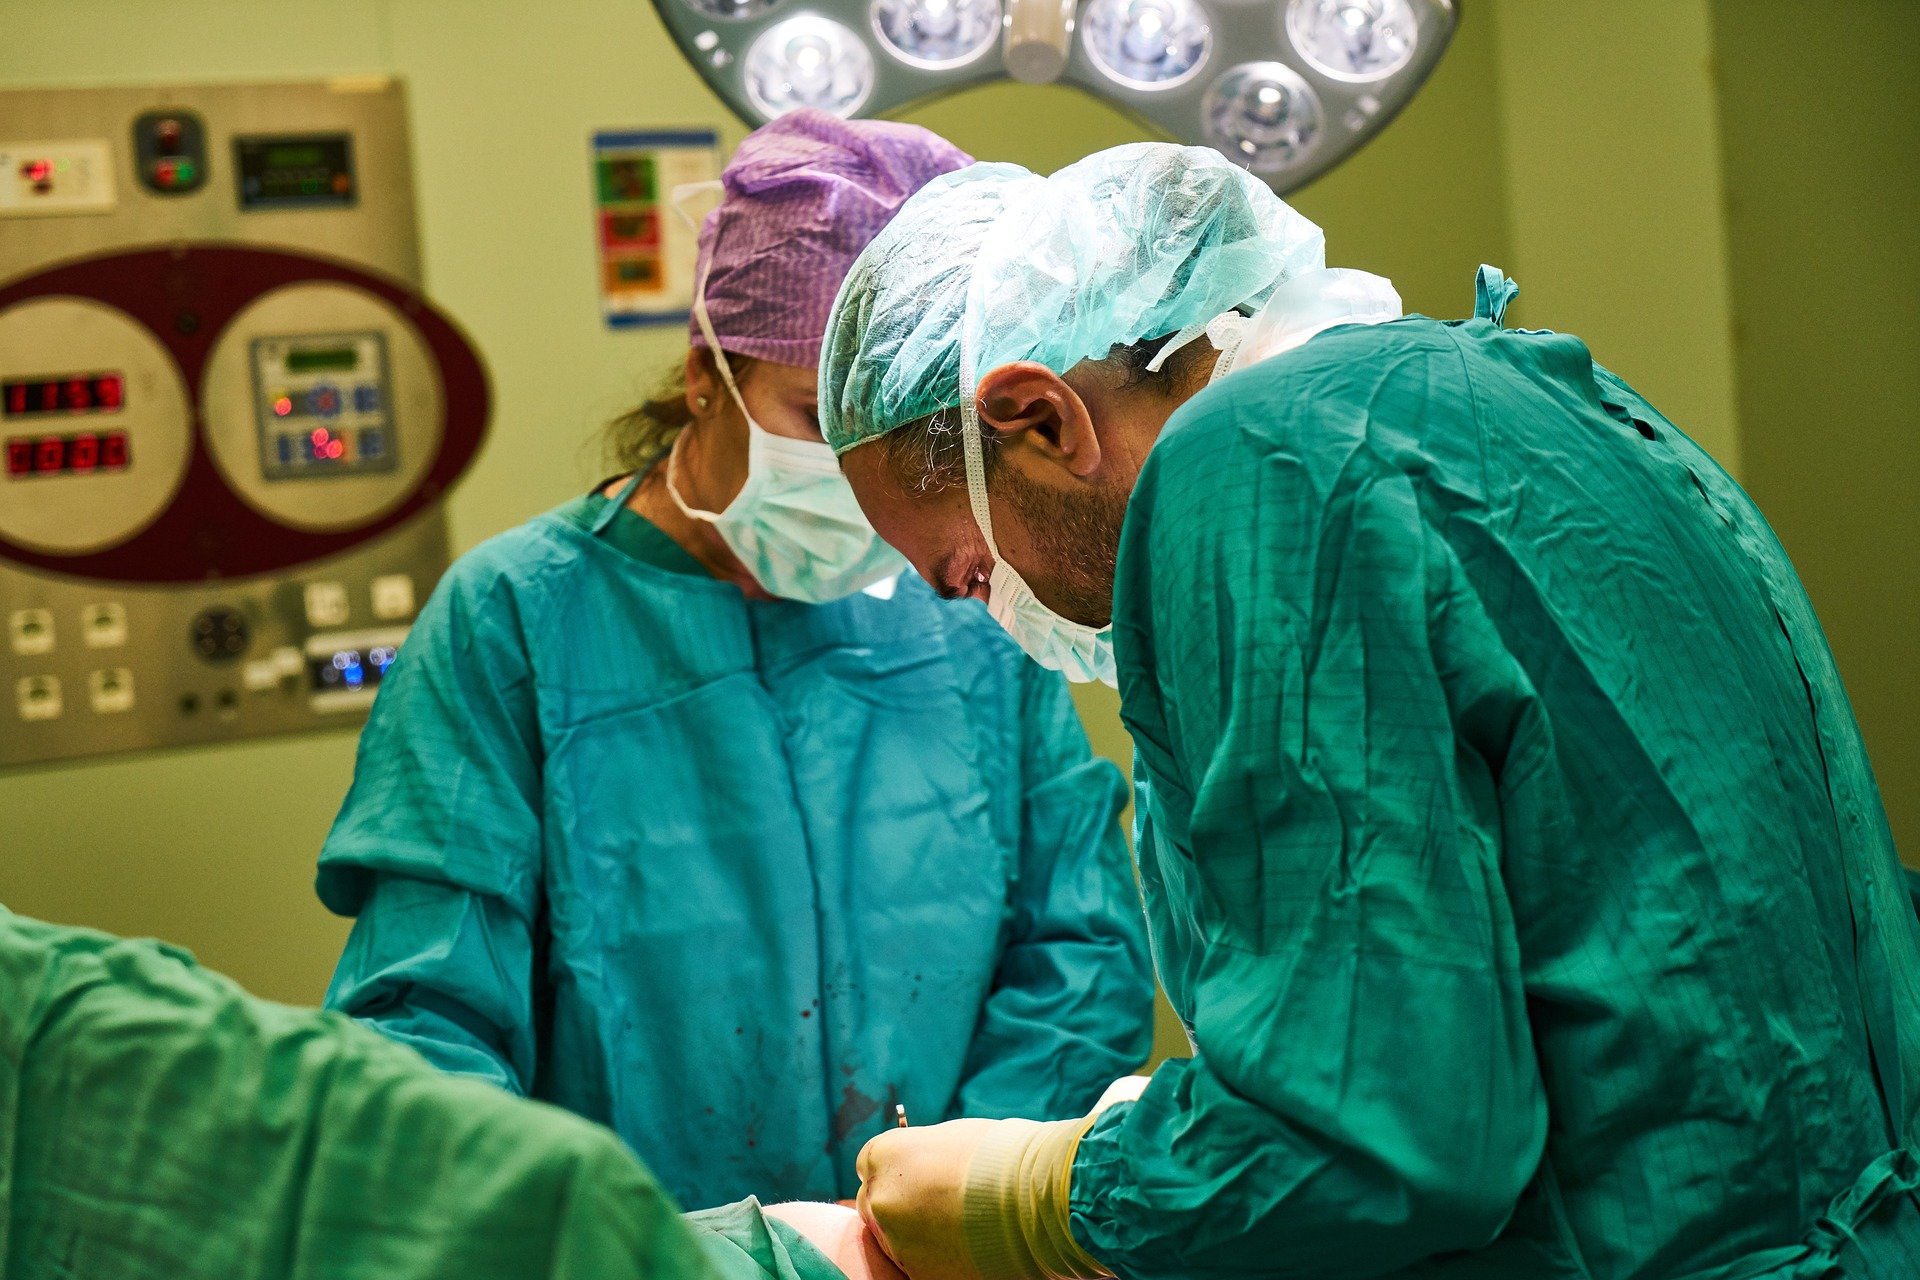 #Reducing noise in operating room improves children’s behavior after surgery, study finds